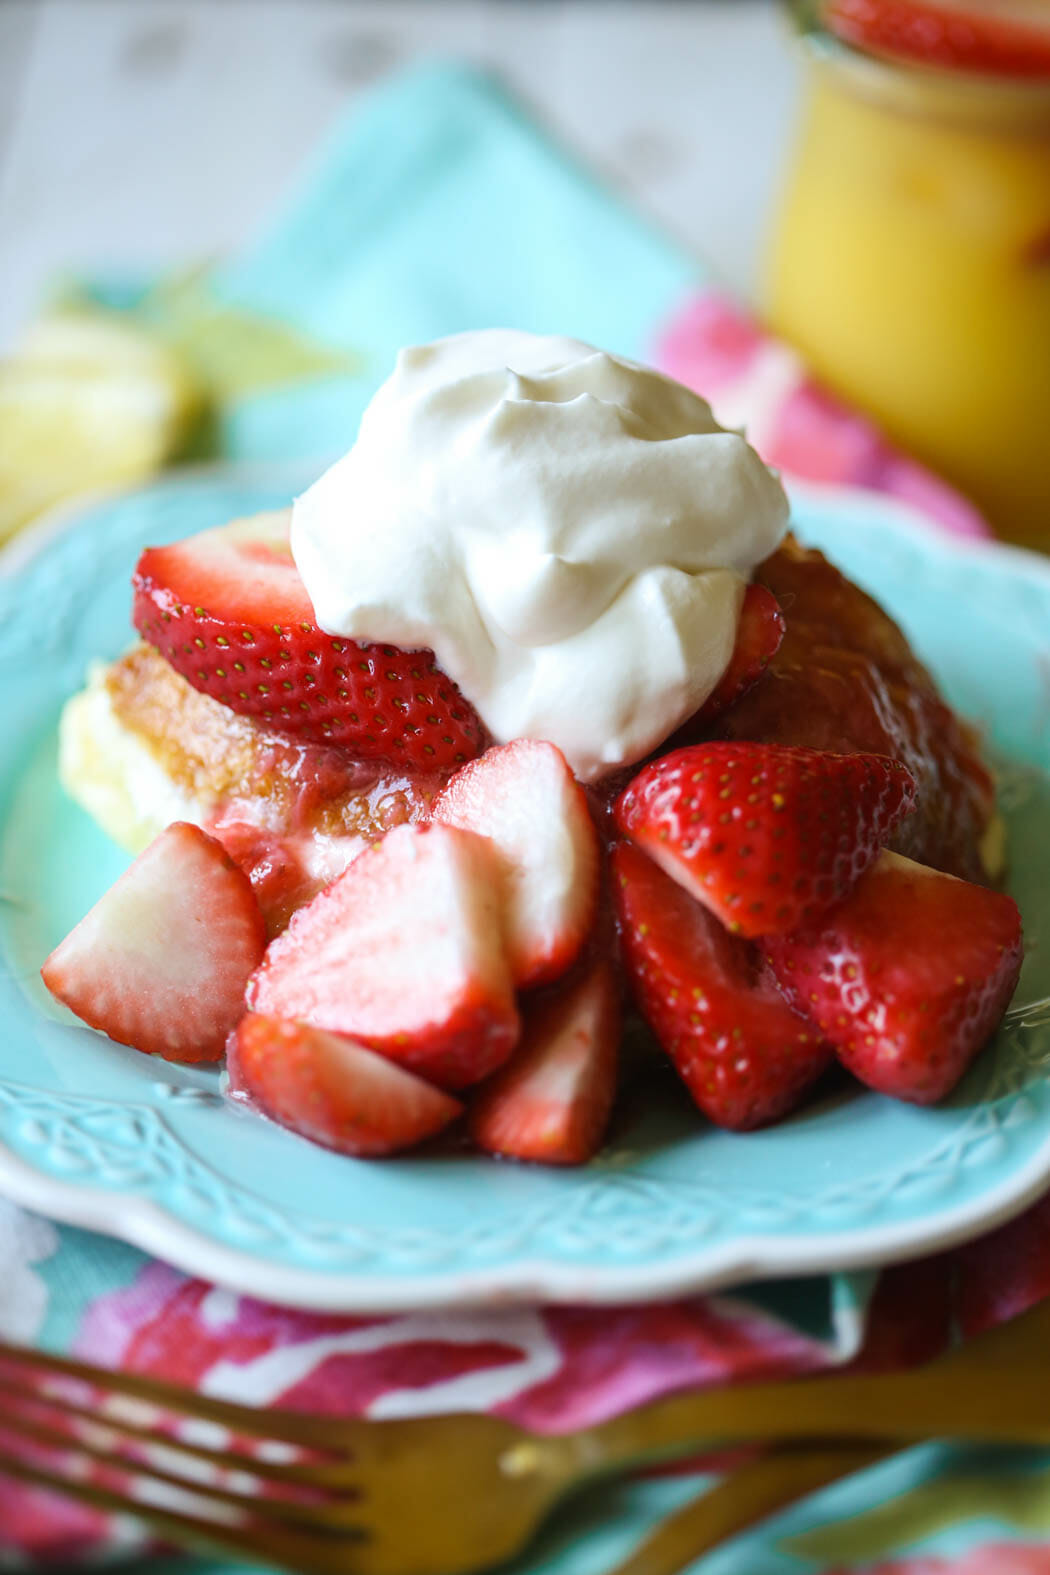 Overnight Cream Cheese Stuffed Lemon French Toast with Strawberries from Our Best Bites